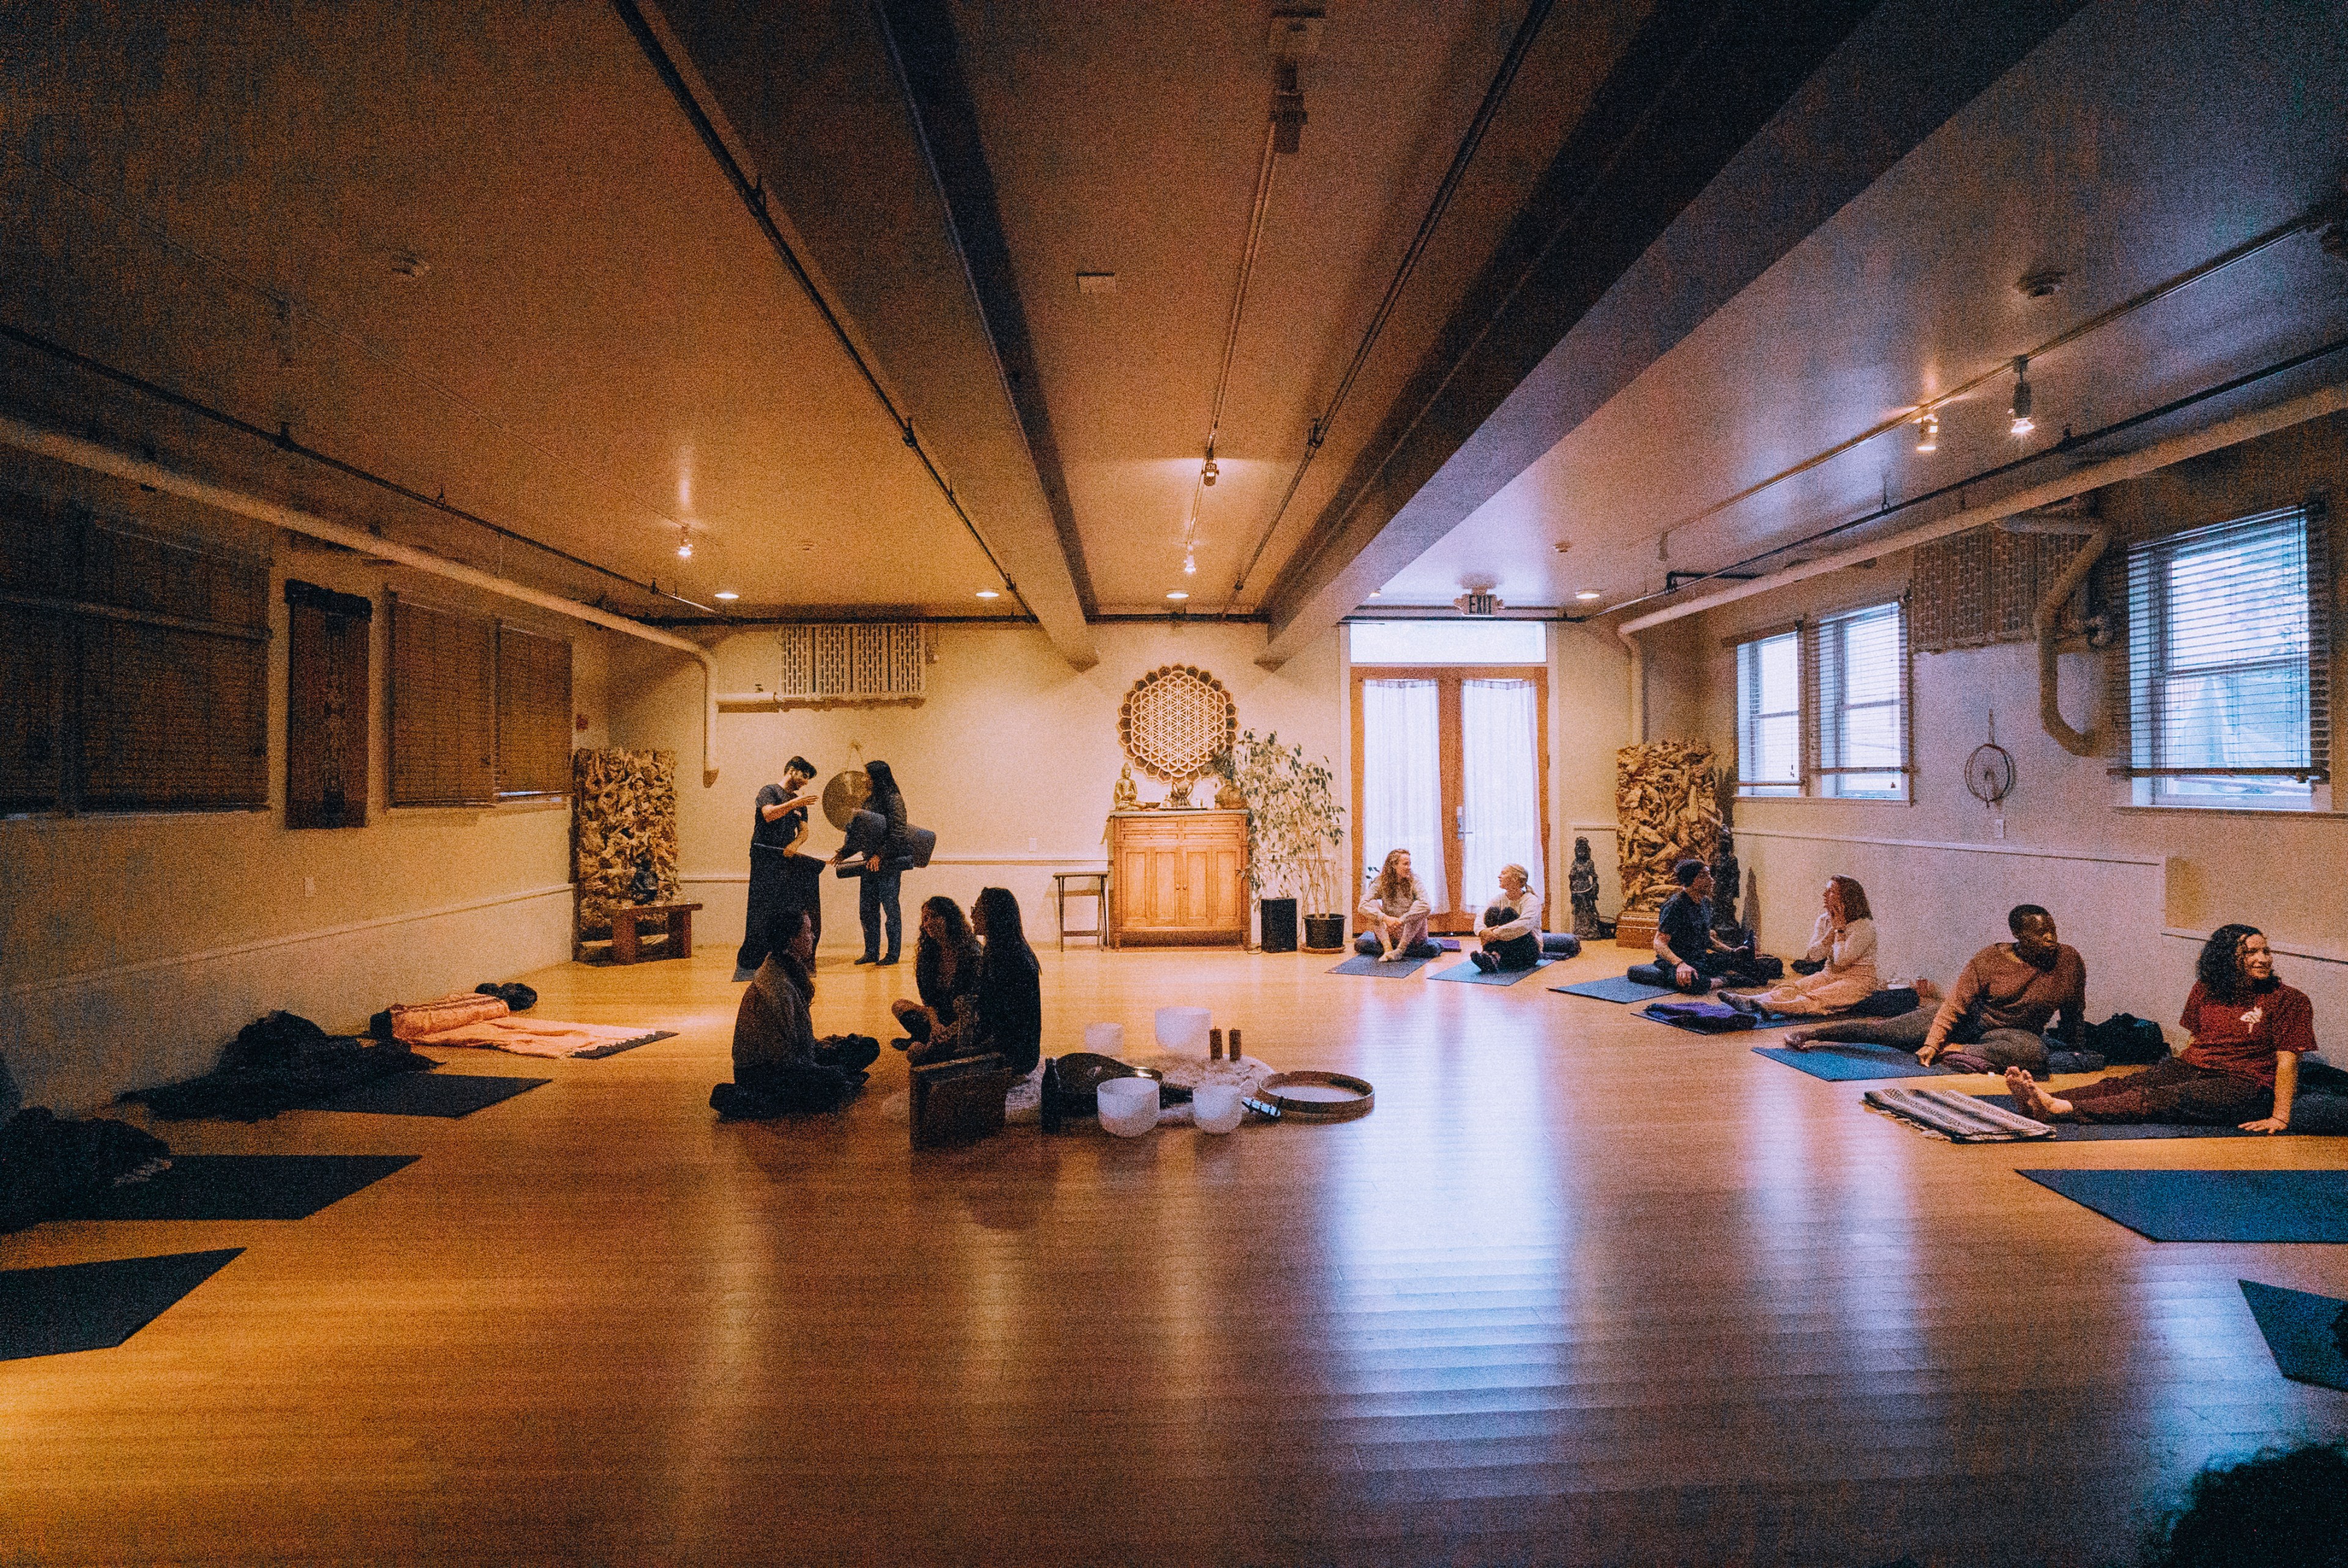 A group of people sit on mats in a serene, well-lit room, likely for a yoga or meditation session. A few individuals converse, and instruments are neatly arranged in the center.